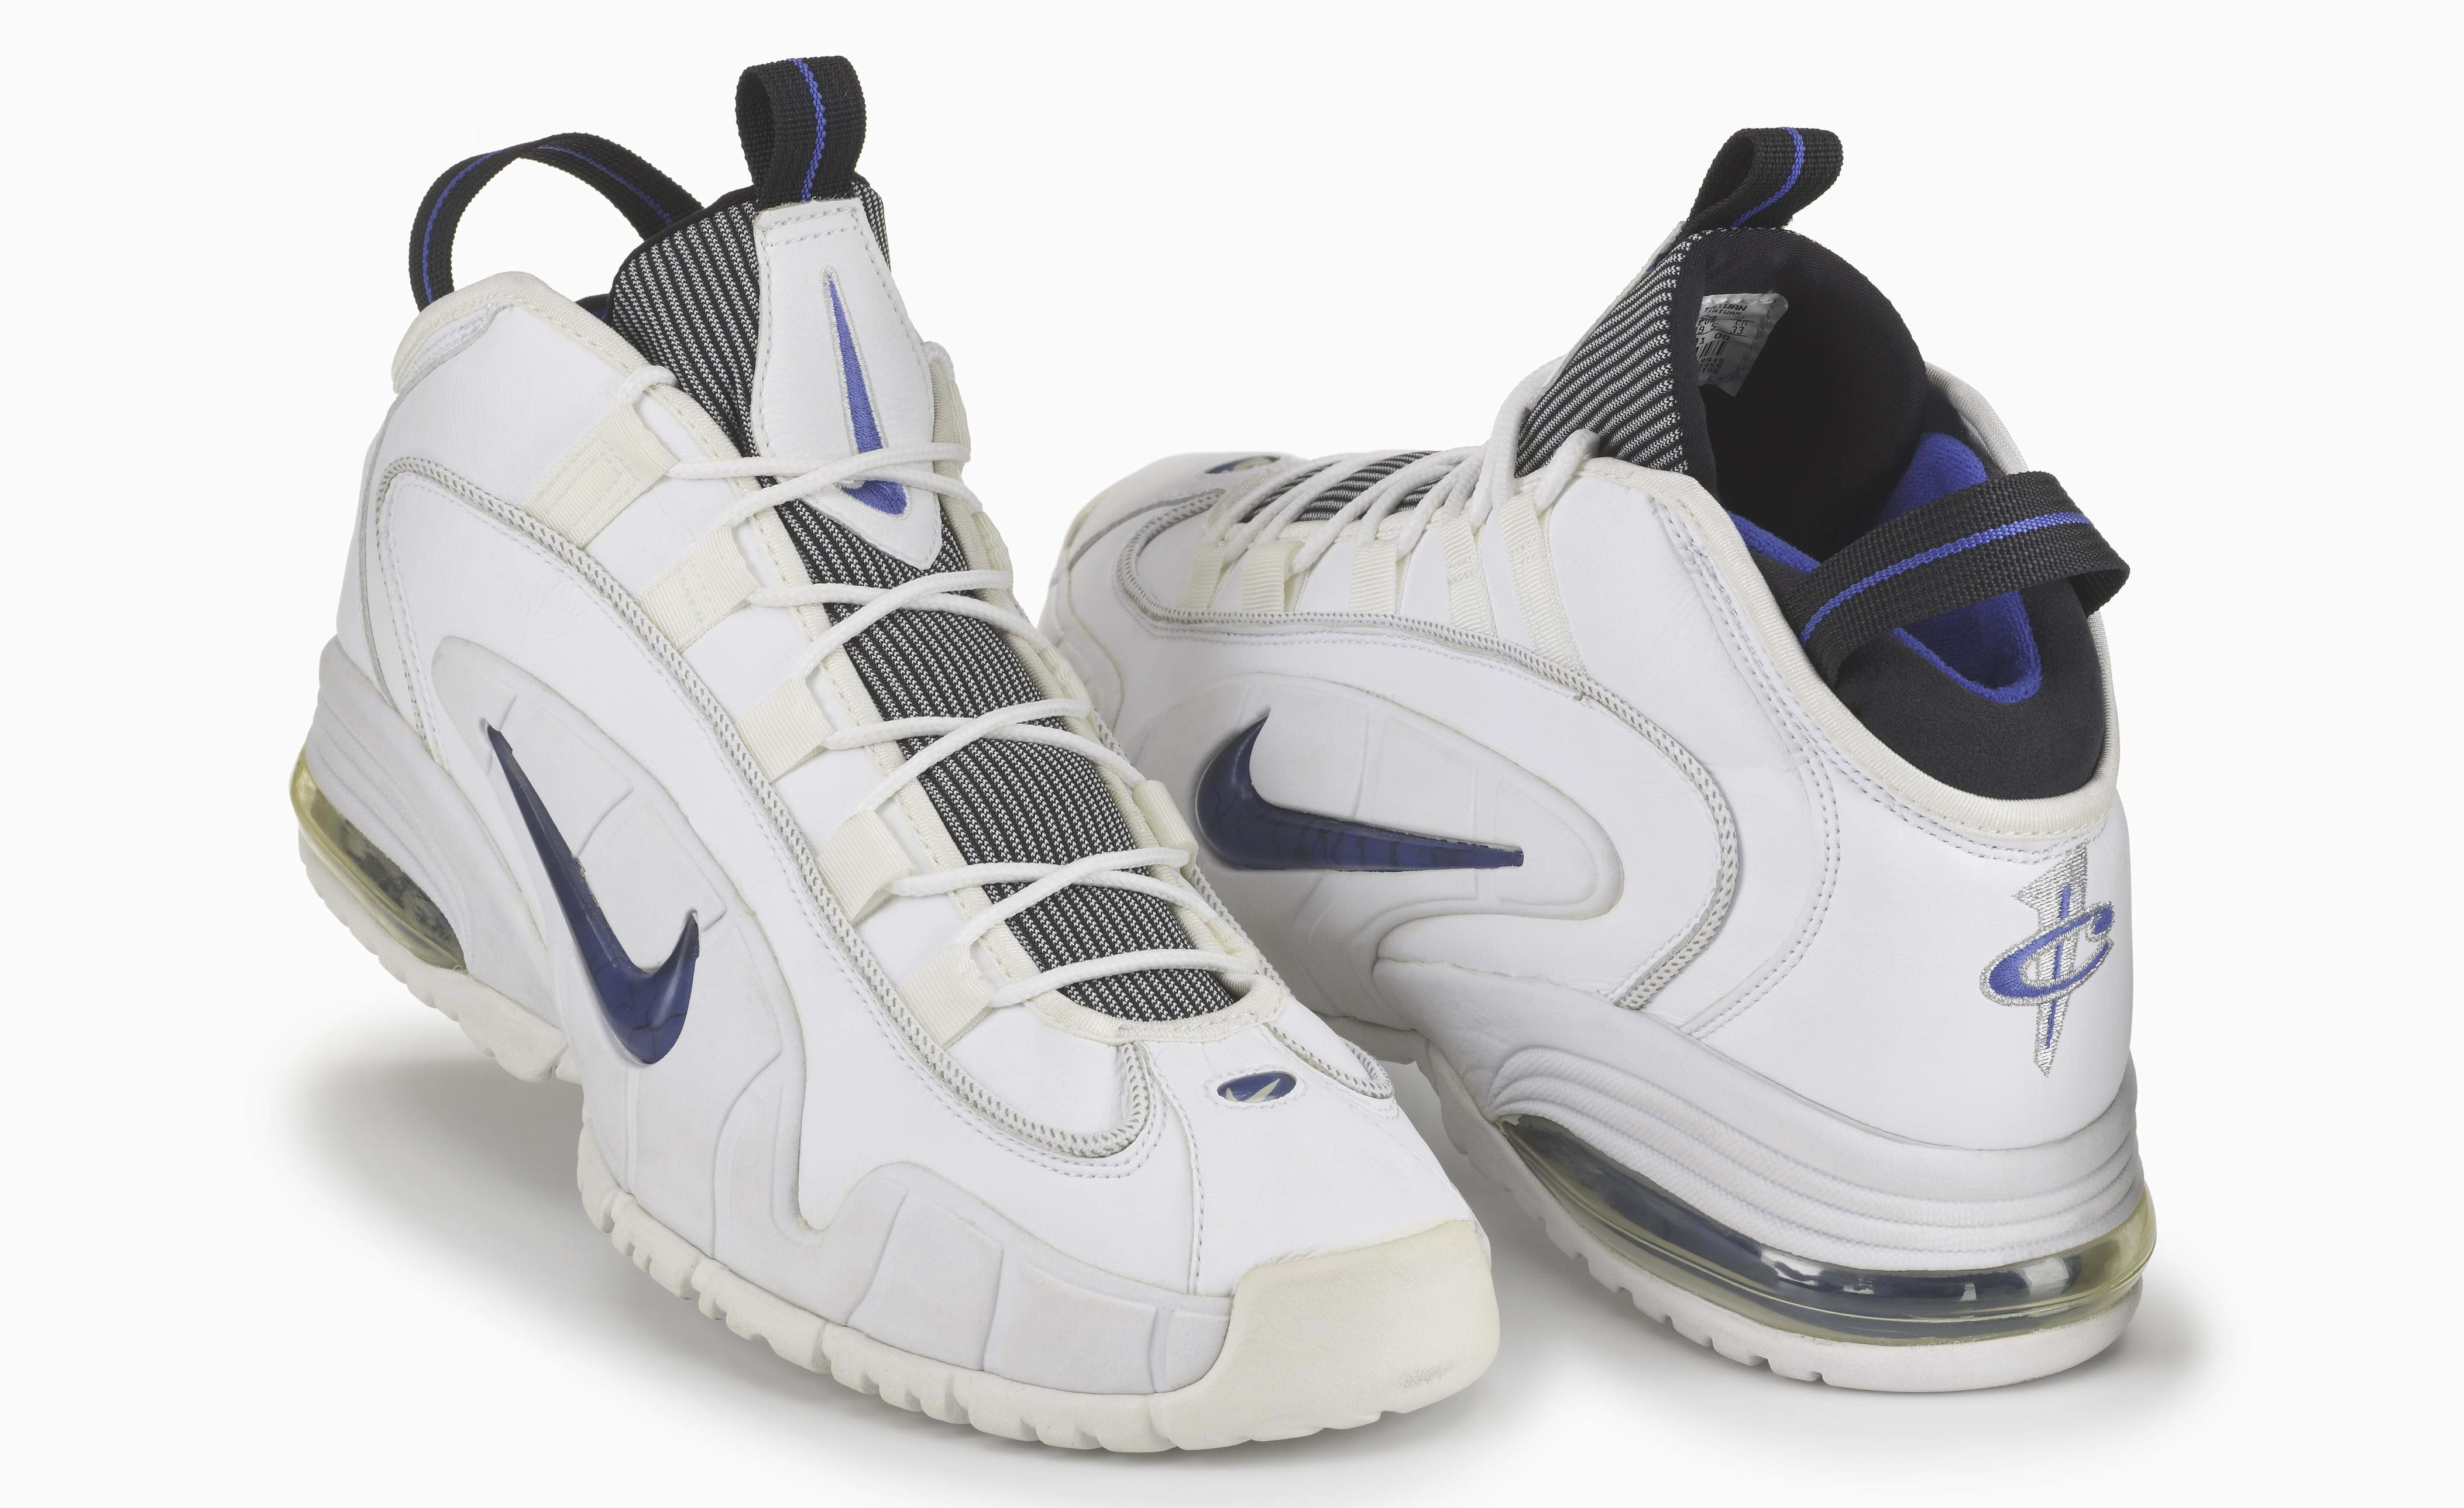 Nike Air Max Penny 1 Orlando Home 2022 Release Date Pair